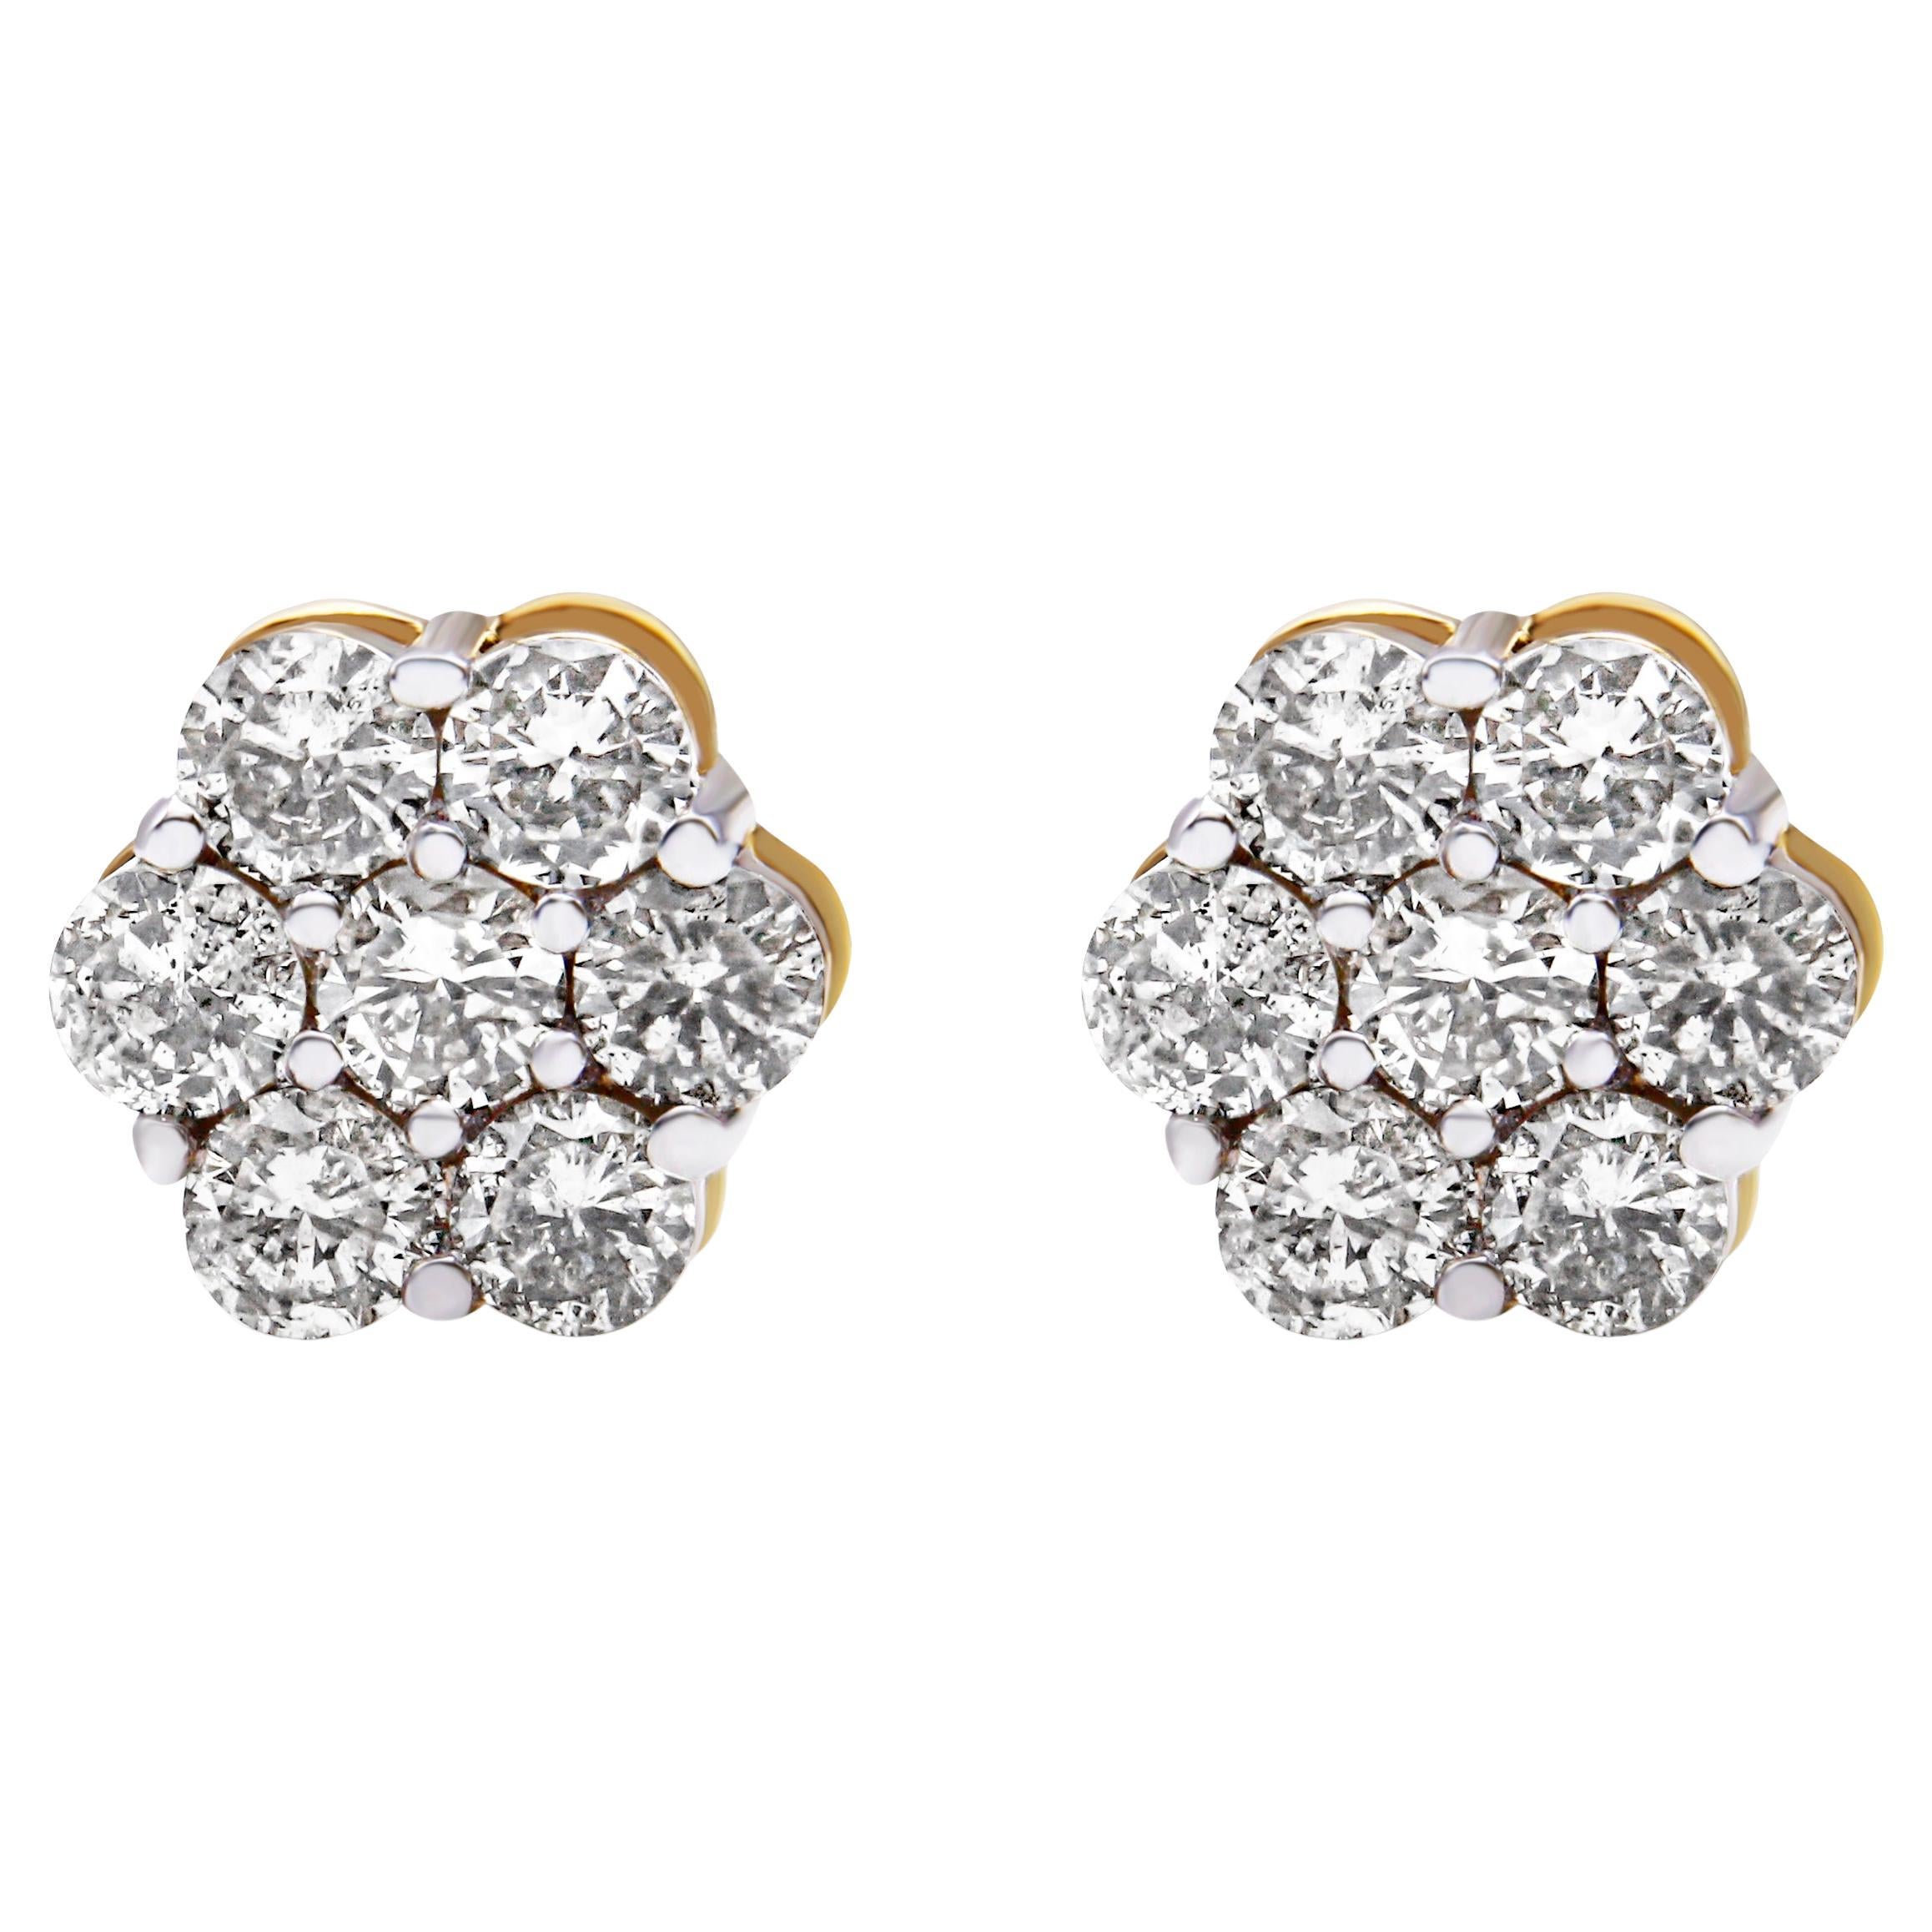 Yellow Gold Plated Sterling Silver 2.0 Carat Diamond Floral Cluster Stud Earring